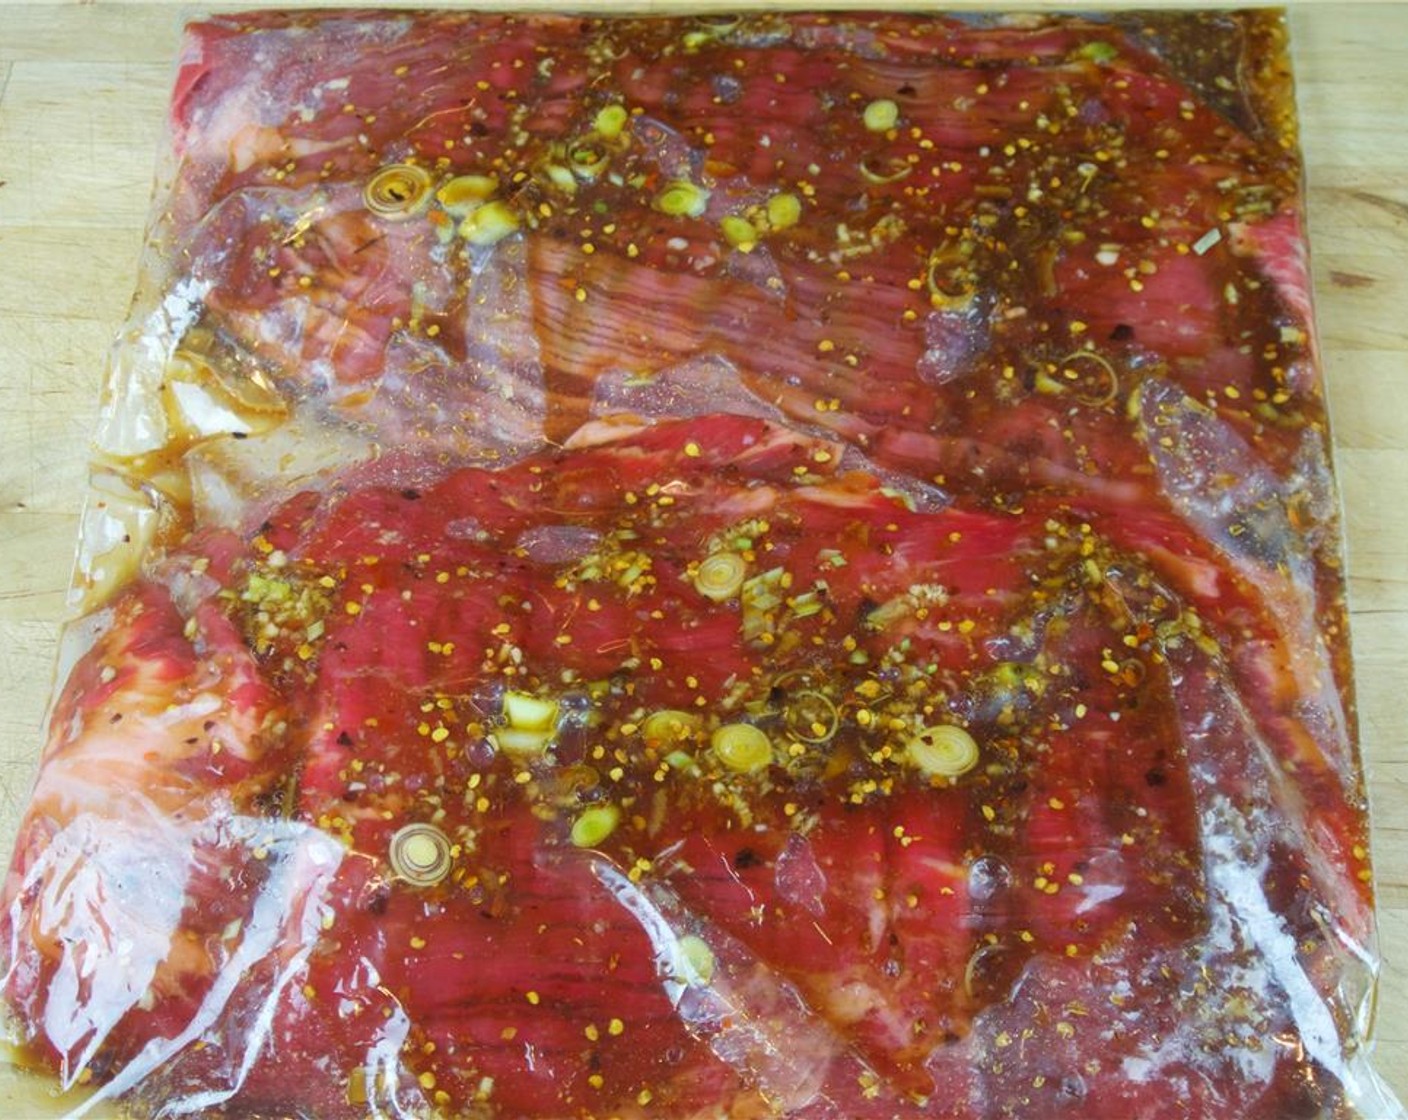 step 2 Put the Flank Steak (1.5 lb) and the marinade in a ziplock bag and refrigerate overnight.